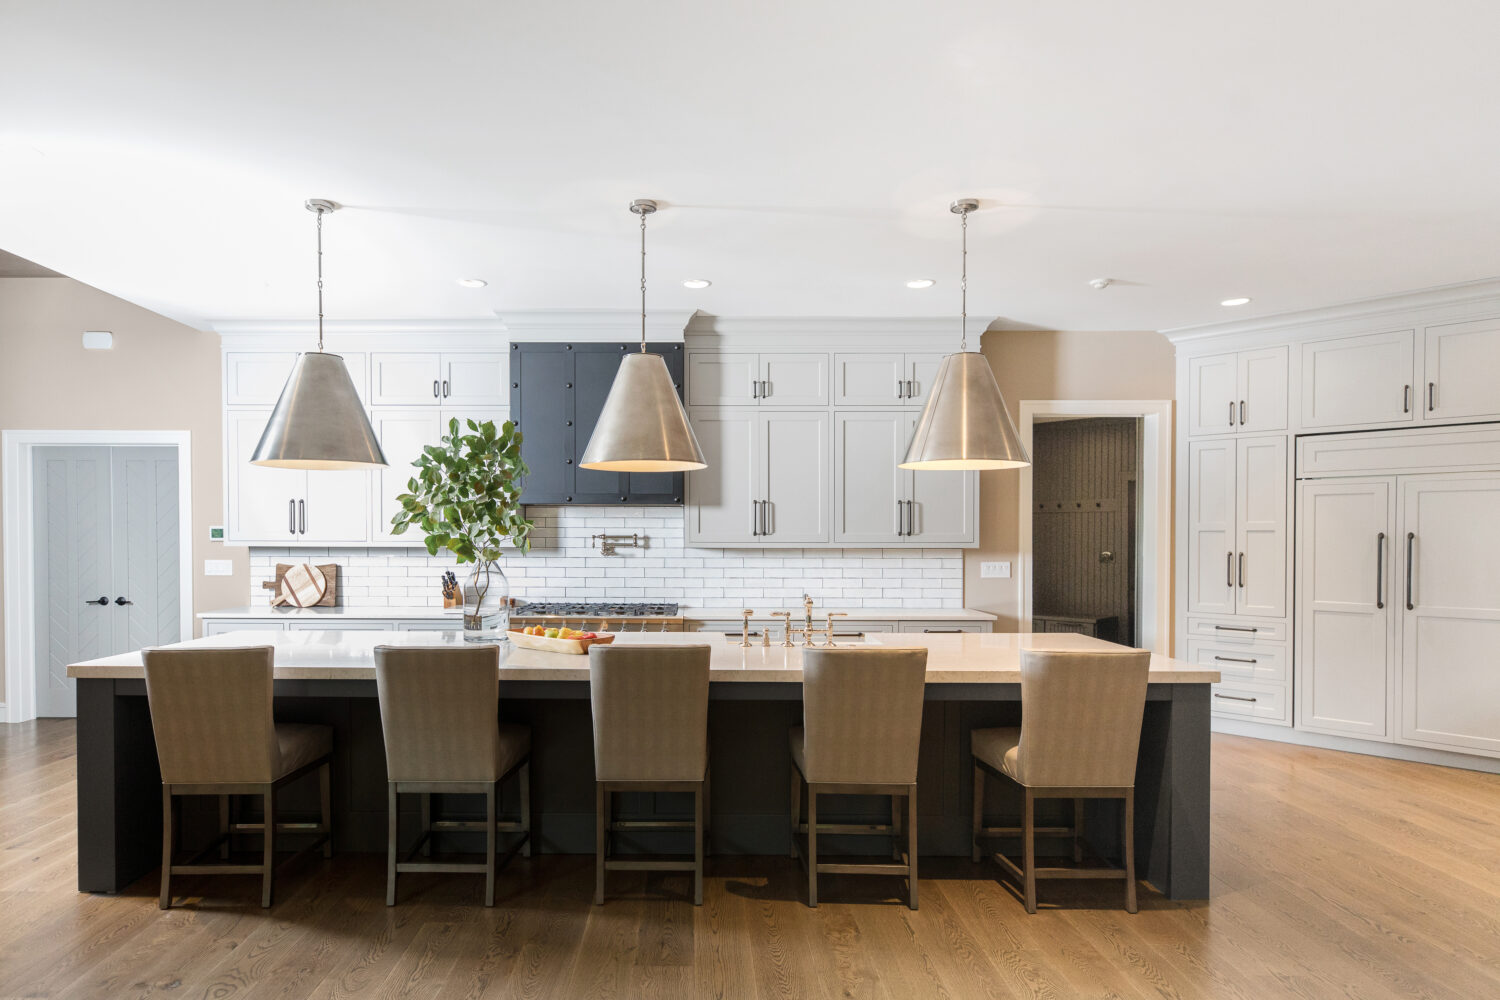 A straight on view of a transitional gray and white kitchen remodel with a long dark gray kitchen island with seating for 5 or 6 surrounded by white painted shaker cabinets.